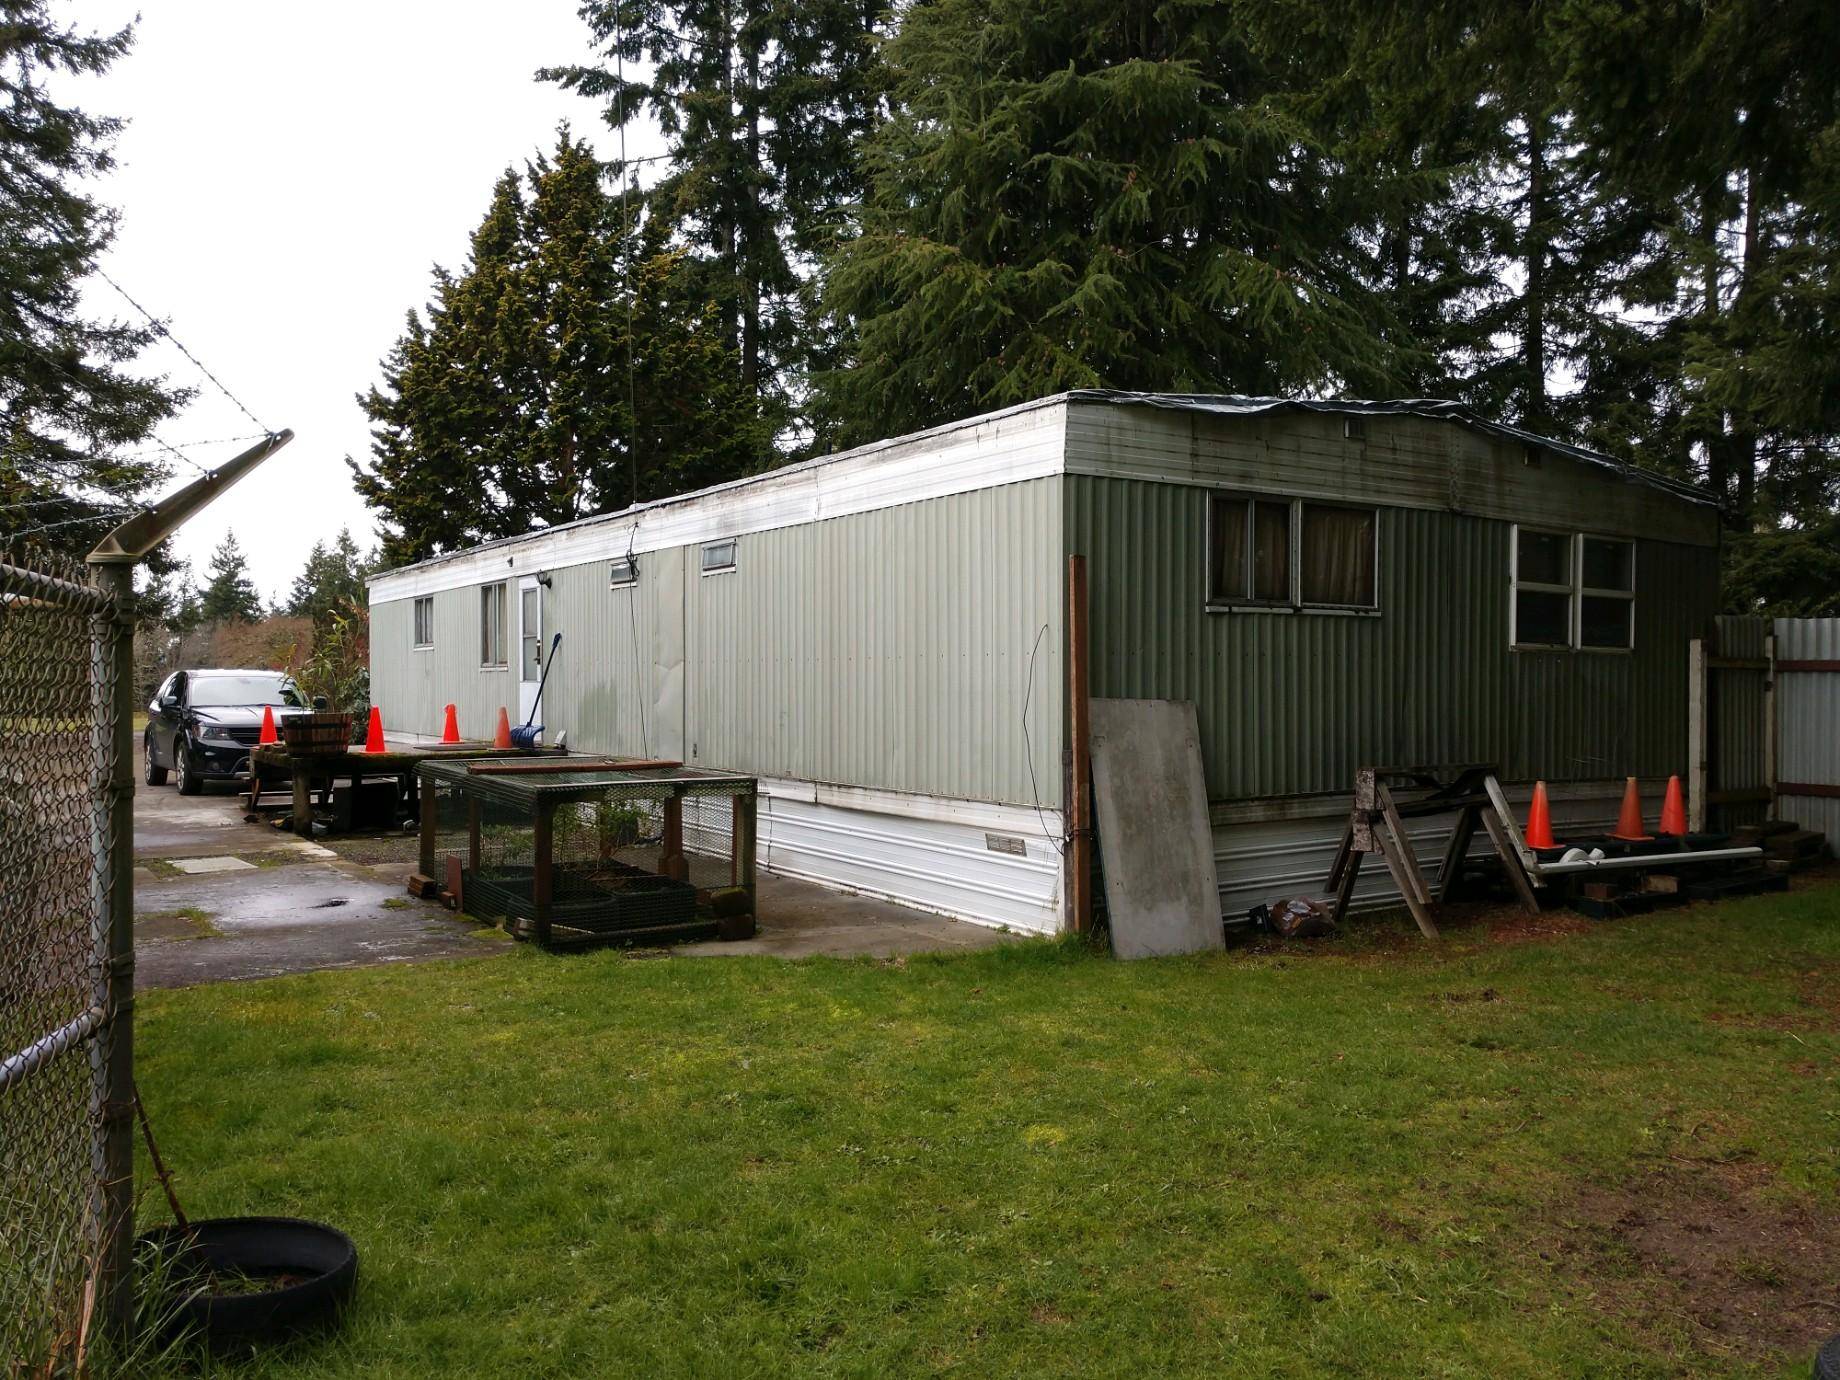 The city hopes to replace the 51 year old mobile home sometime in the future. courtesy photo